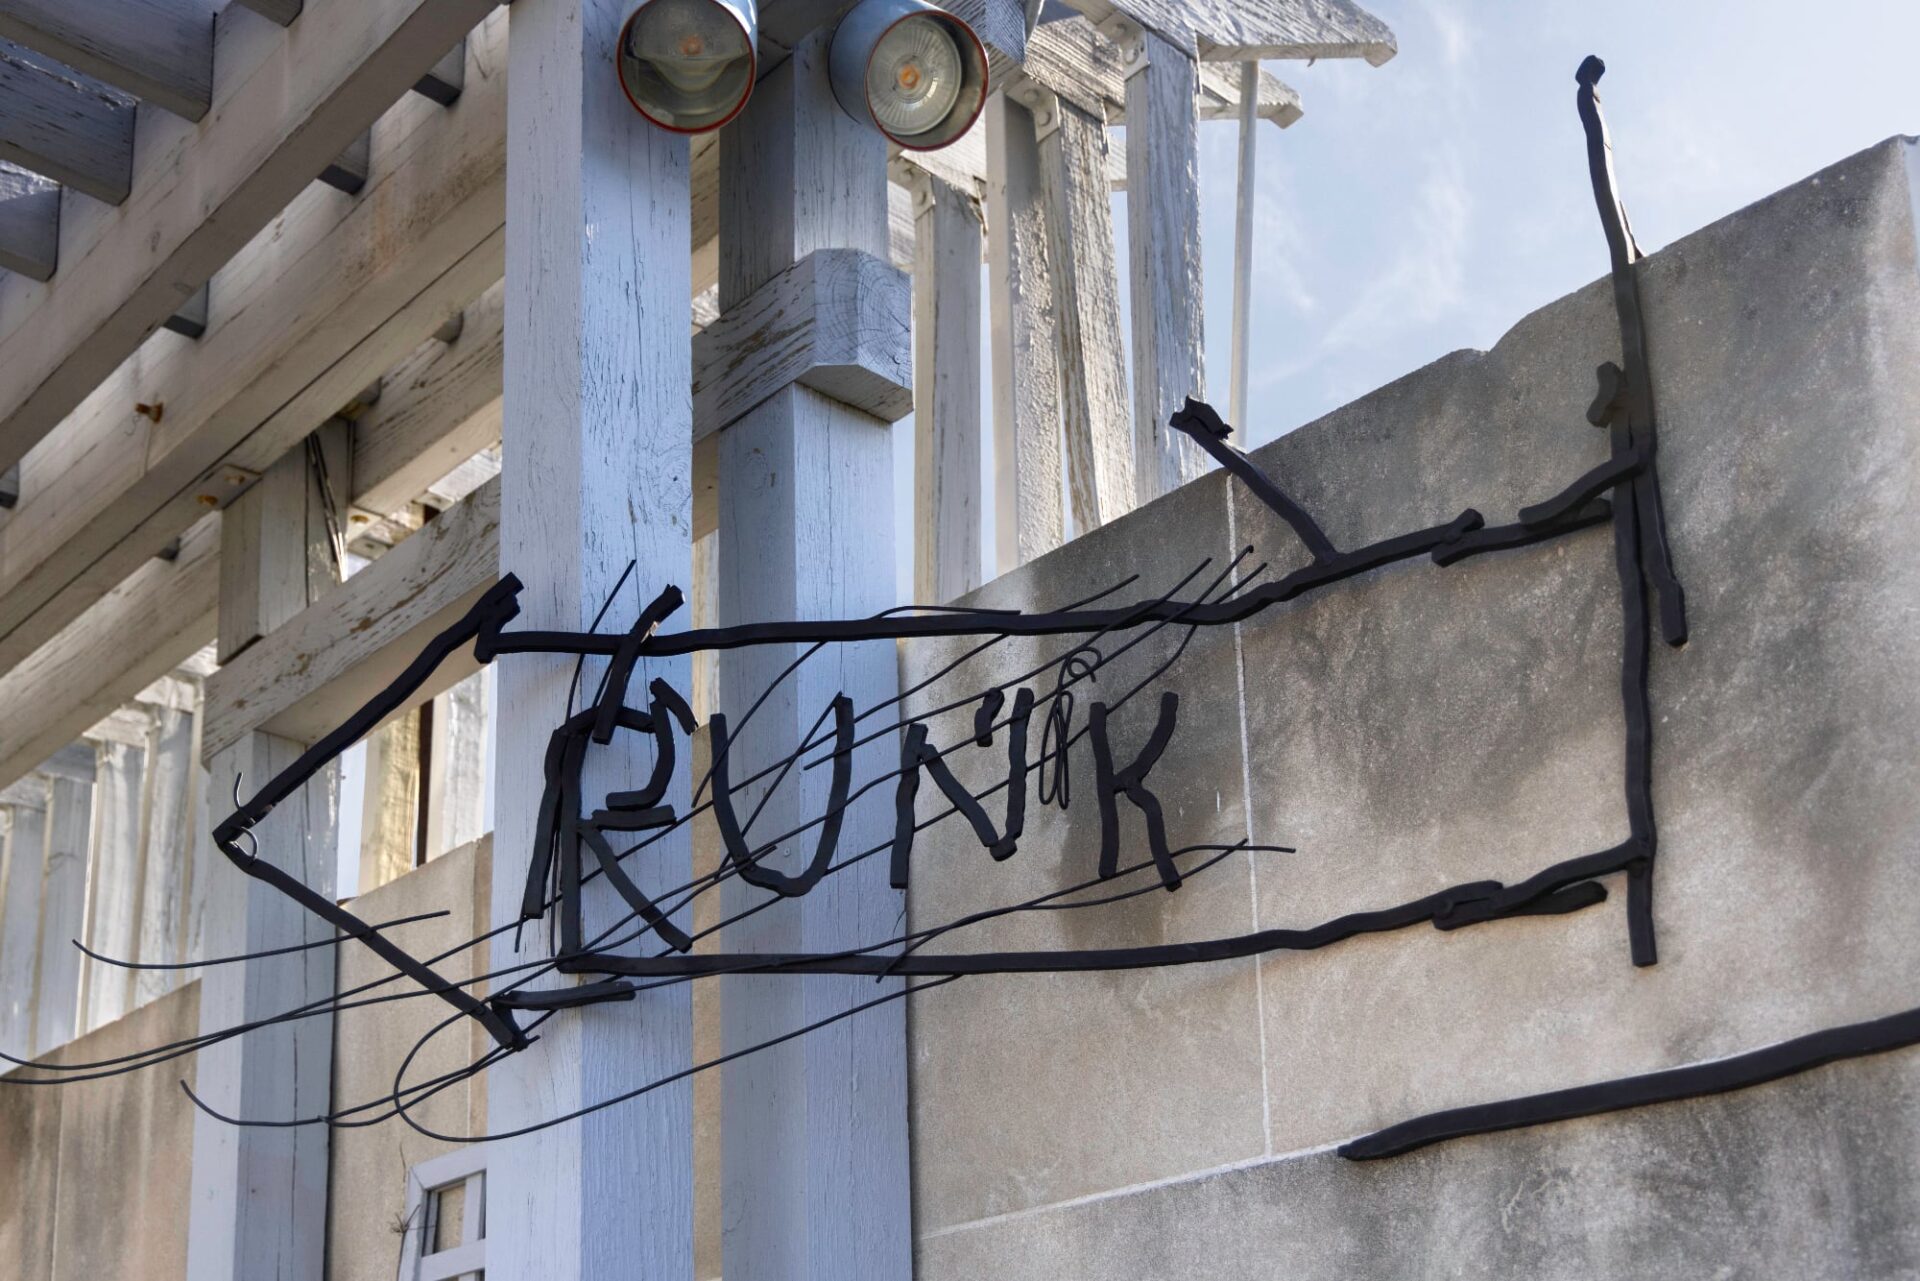 a scratchy wall sculptures of an arrow with the words runk on a roof that appears as if it were hand drawn